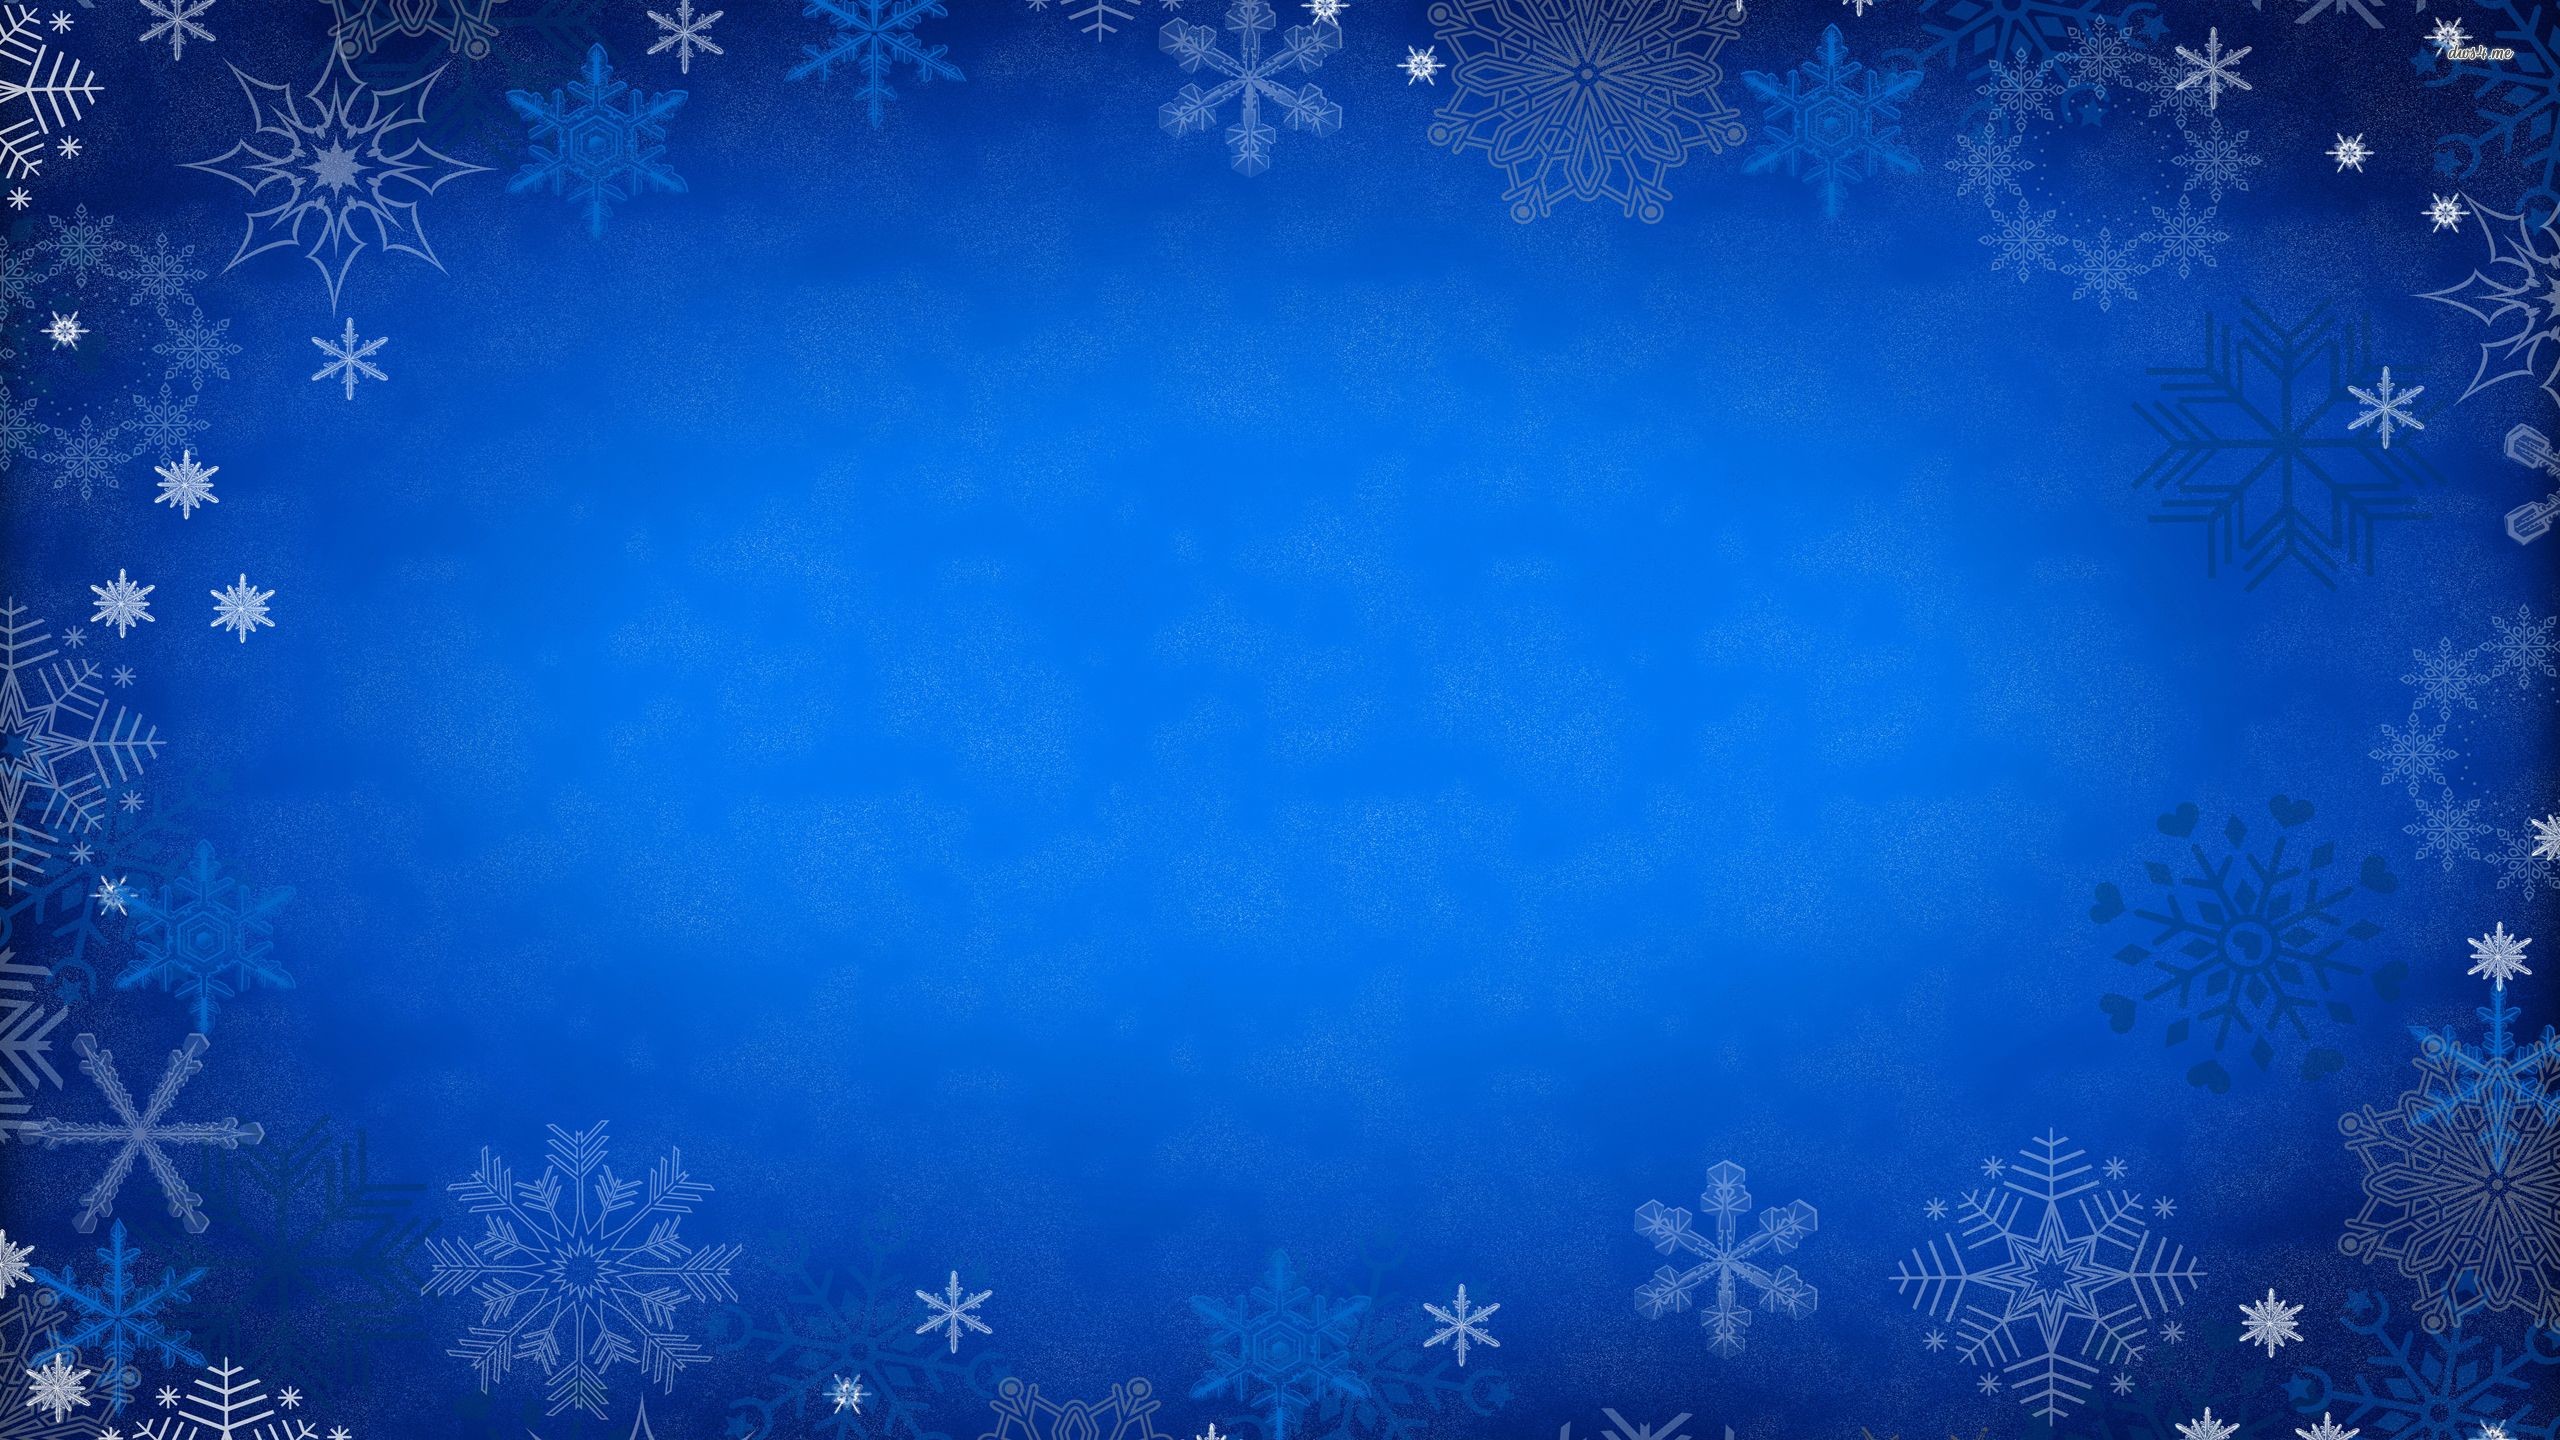 Winter Snowflakes Wallpaper (42+ images)